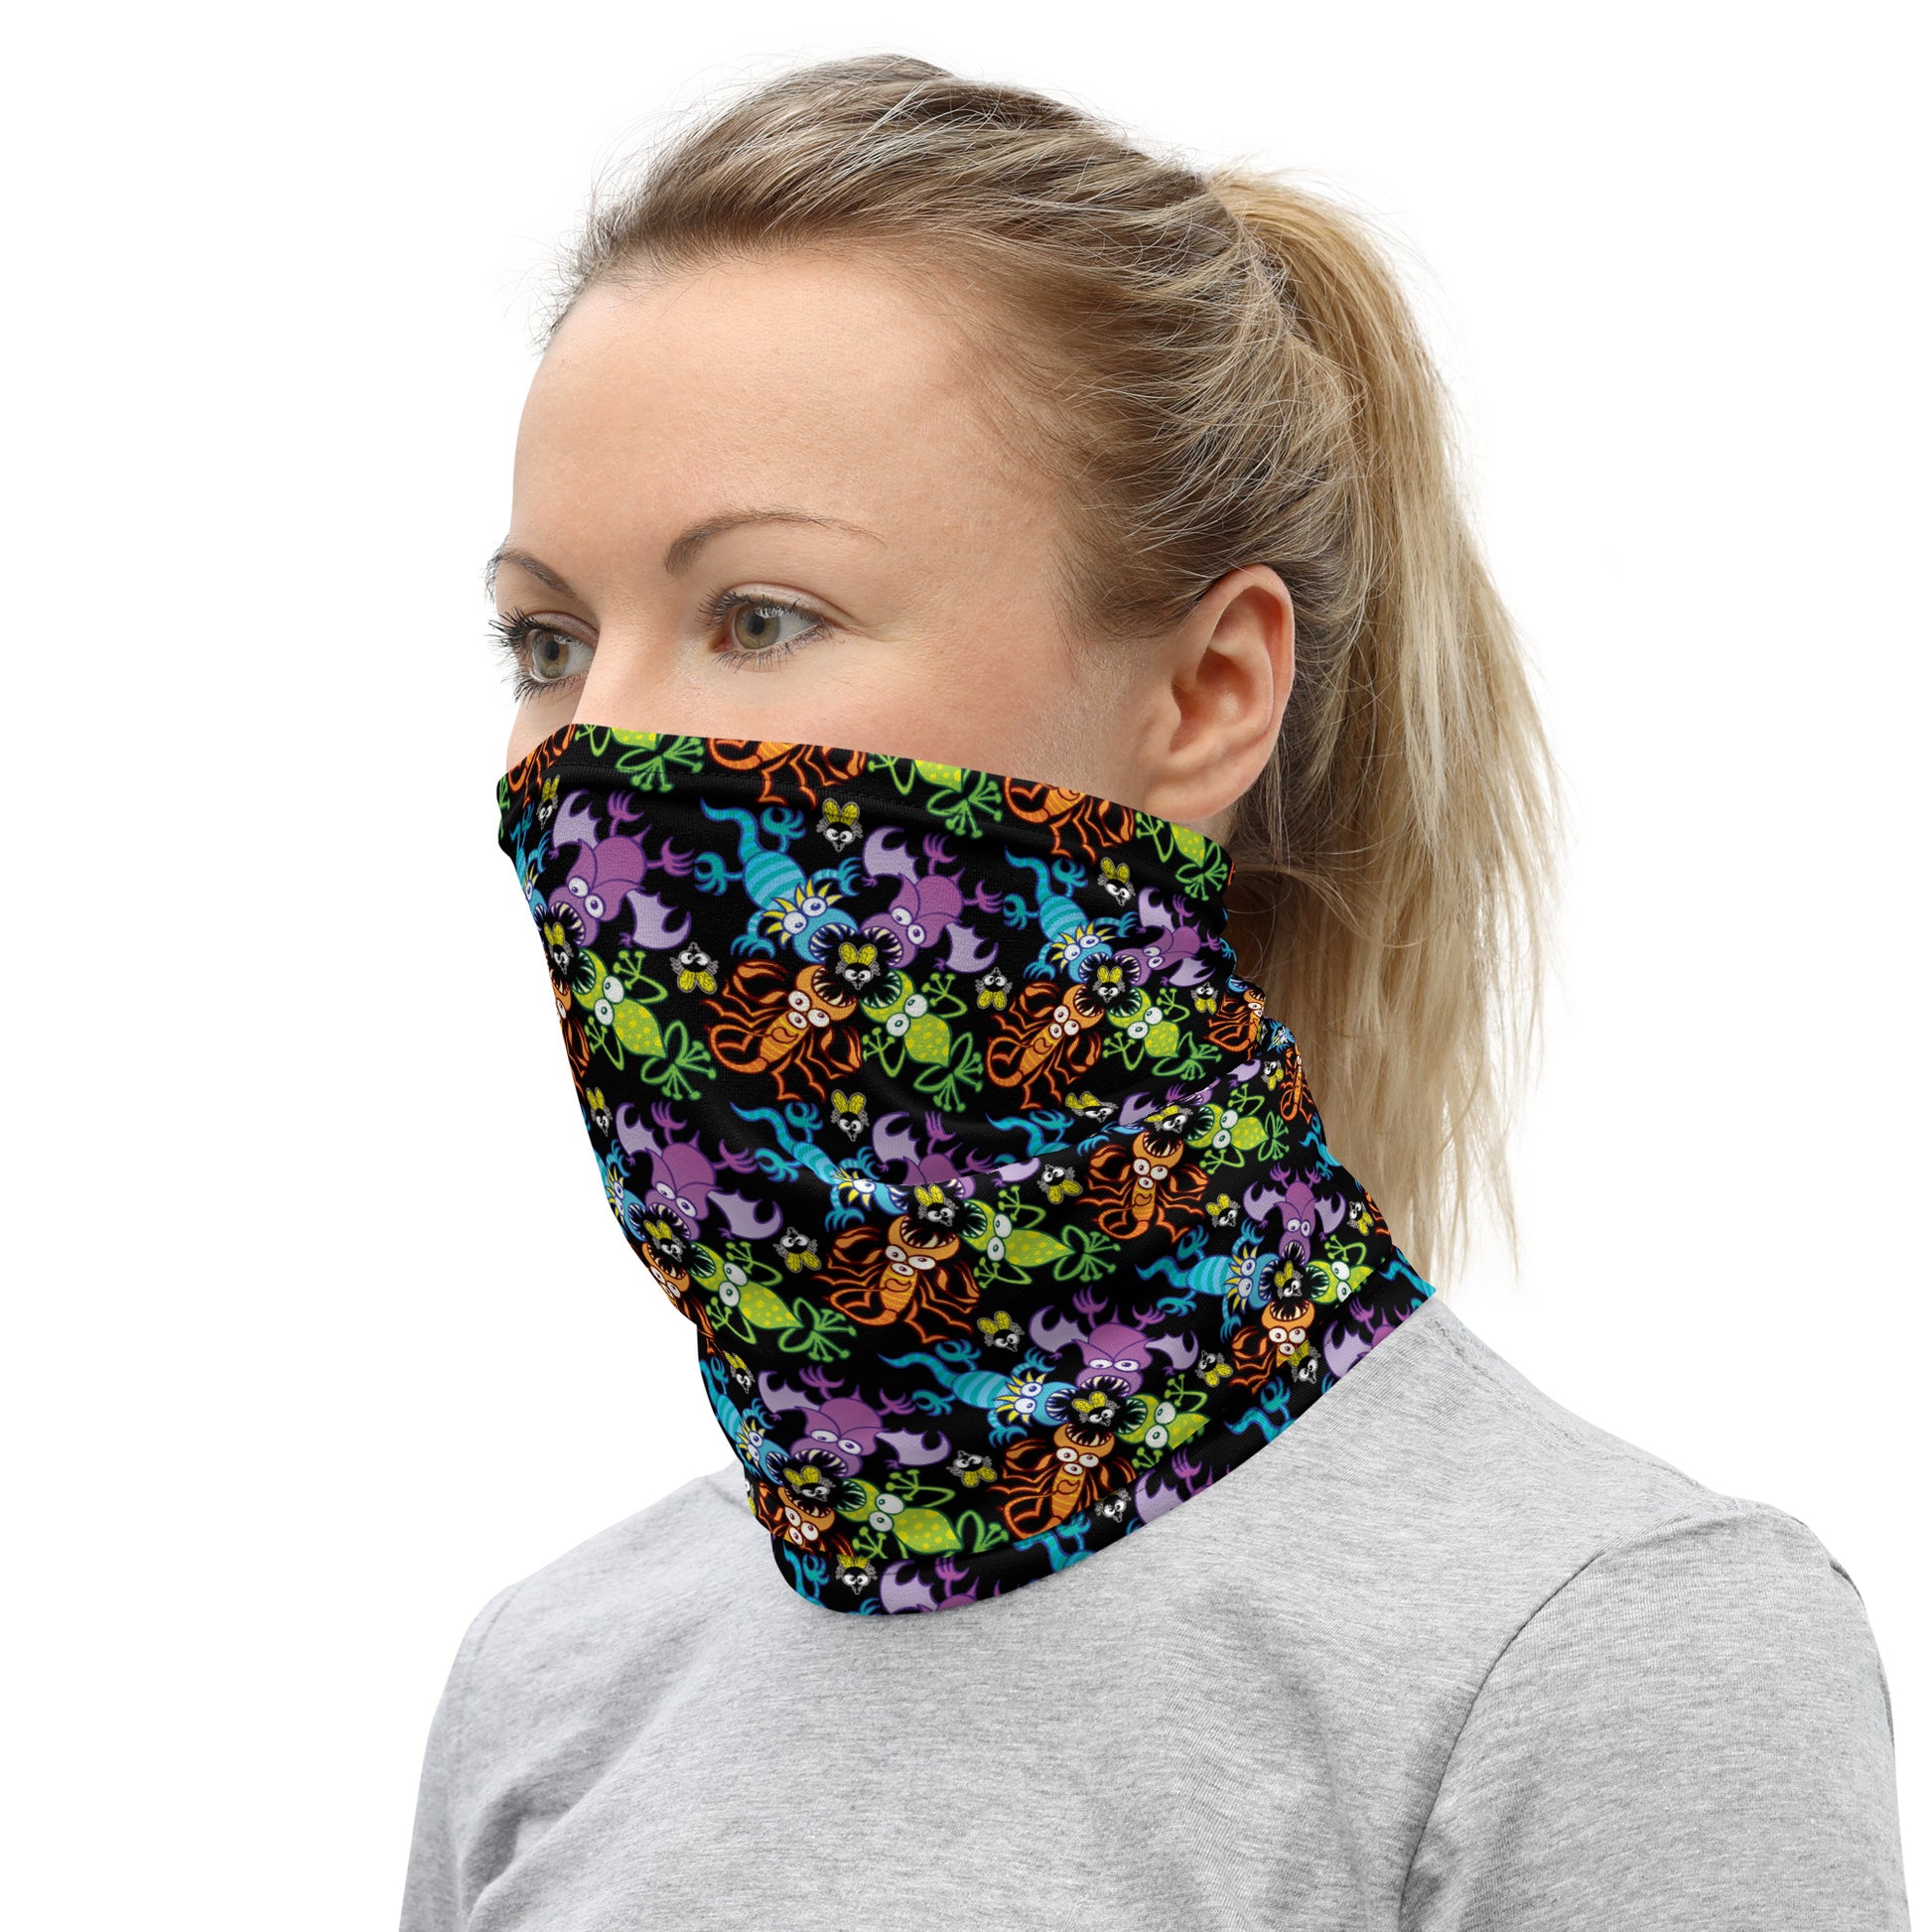 Nice woman wearing Neck Gaiter all-over printed with Bat, scorpion, lizard and frog fighting over an unlucky fly